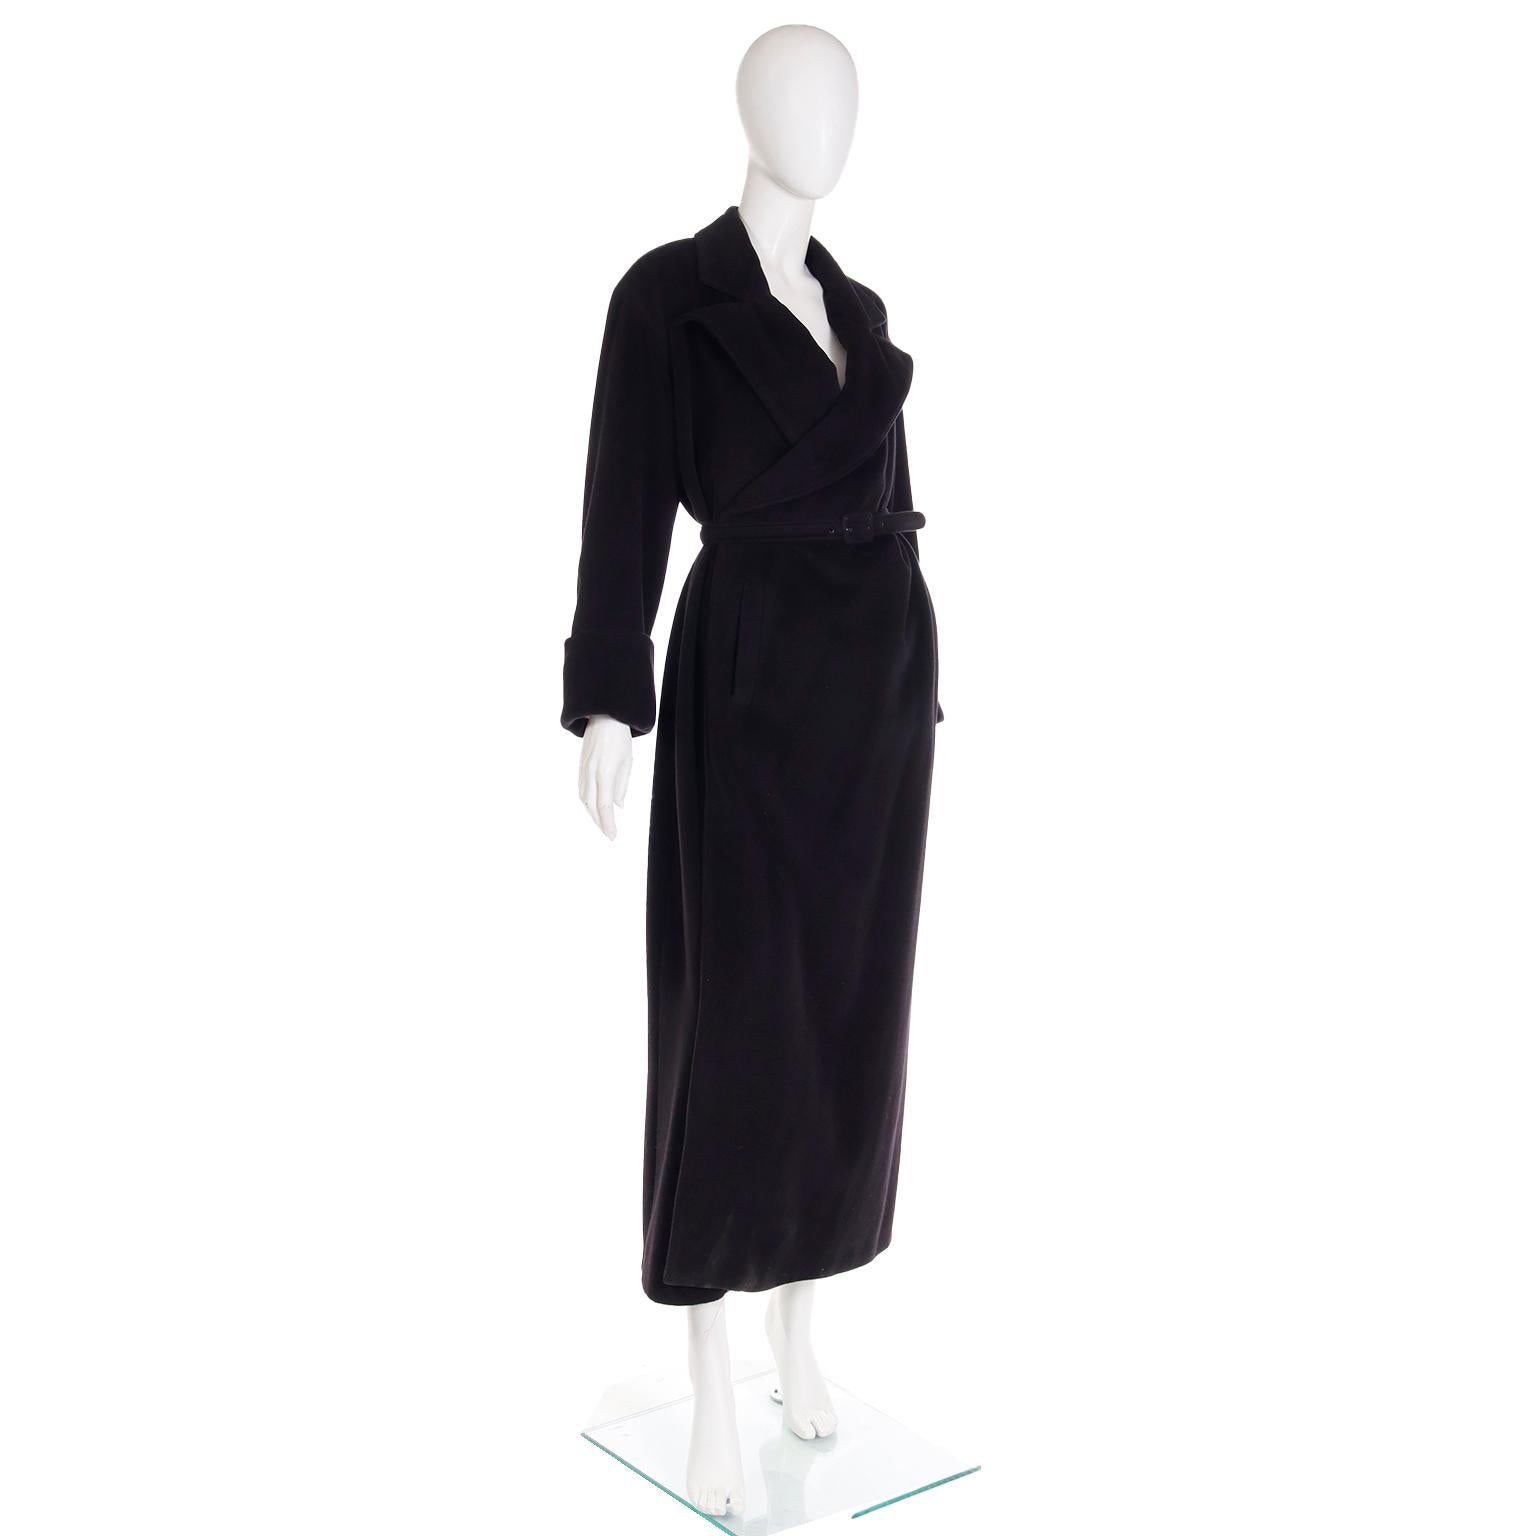 F/W 2000 Jean Paul Gaultier Black Angora Wool Coat with Belt & Signature LIning For Sale 1